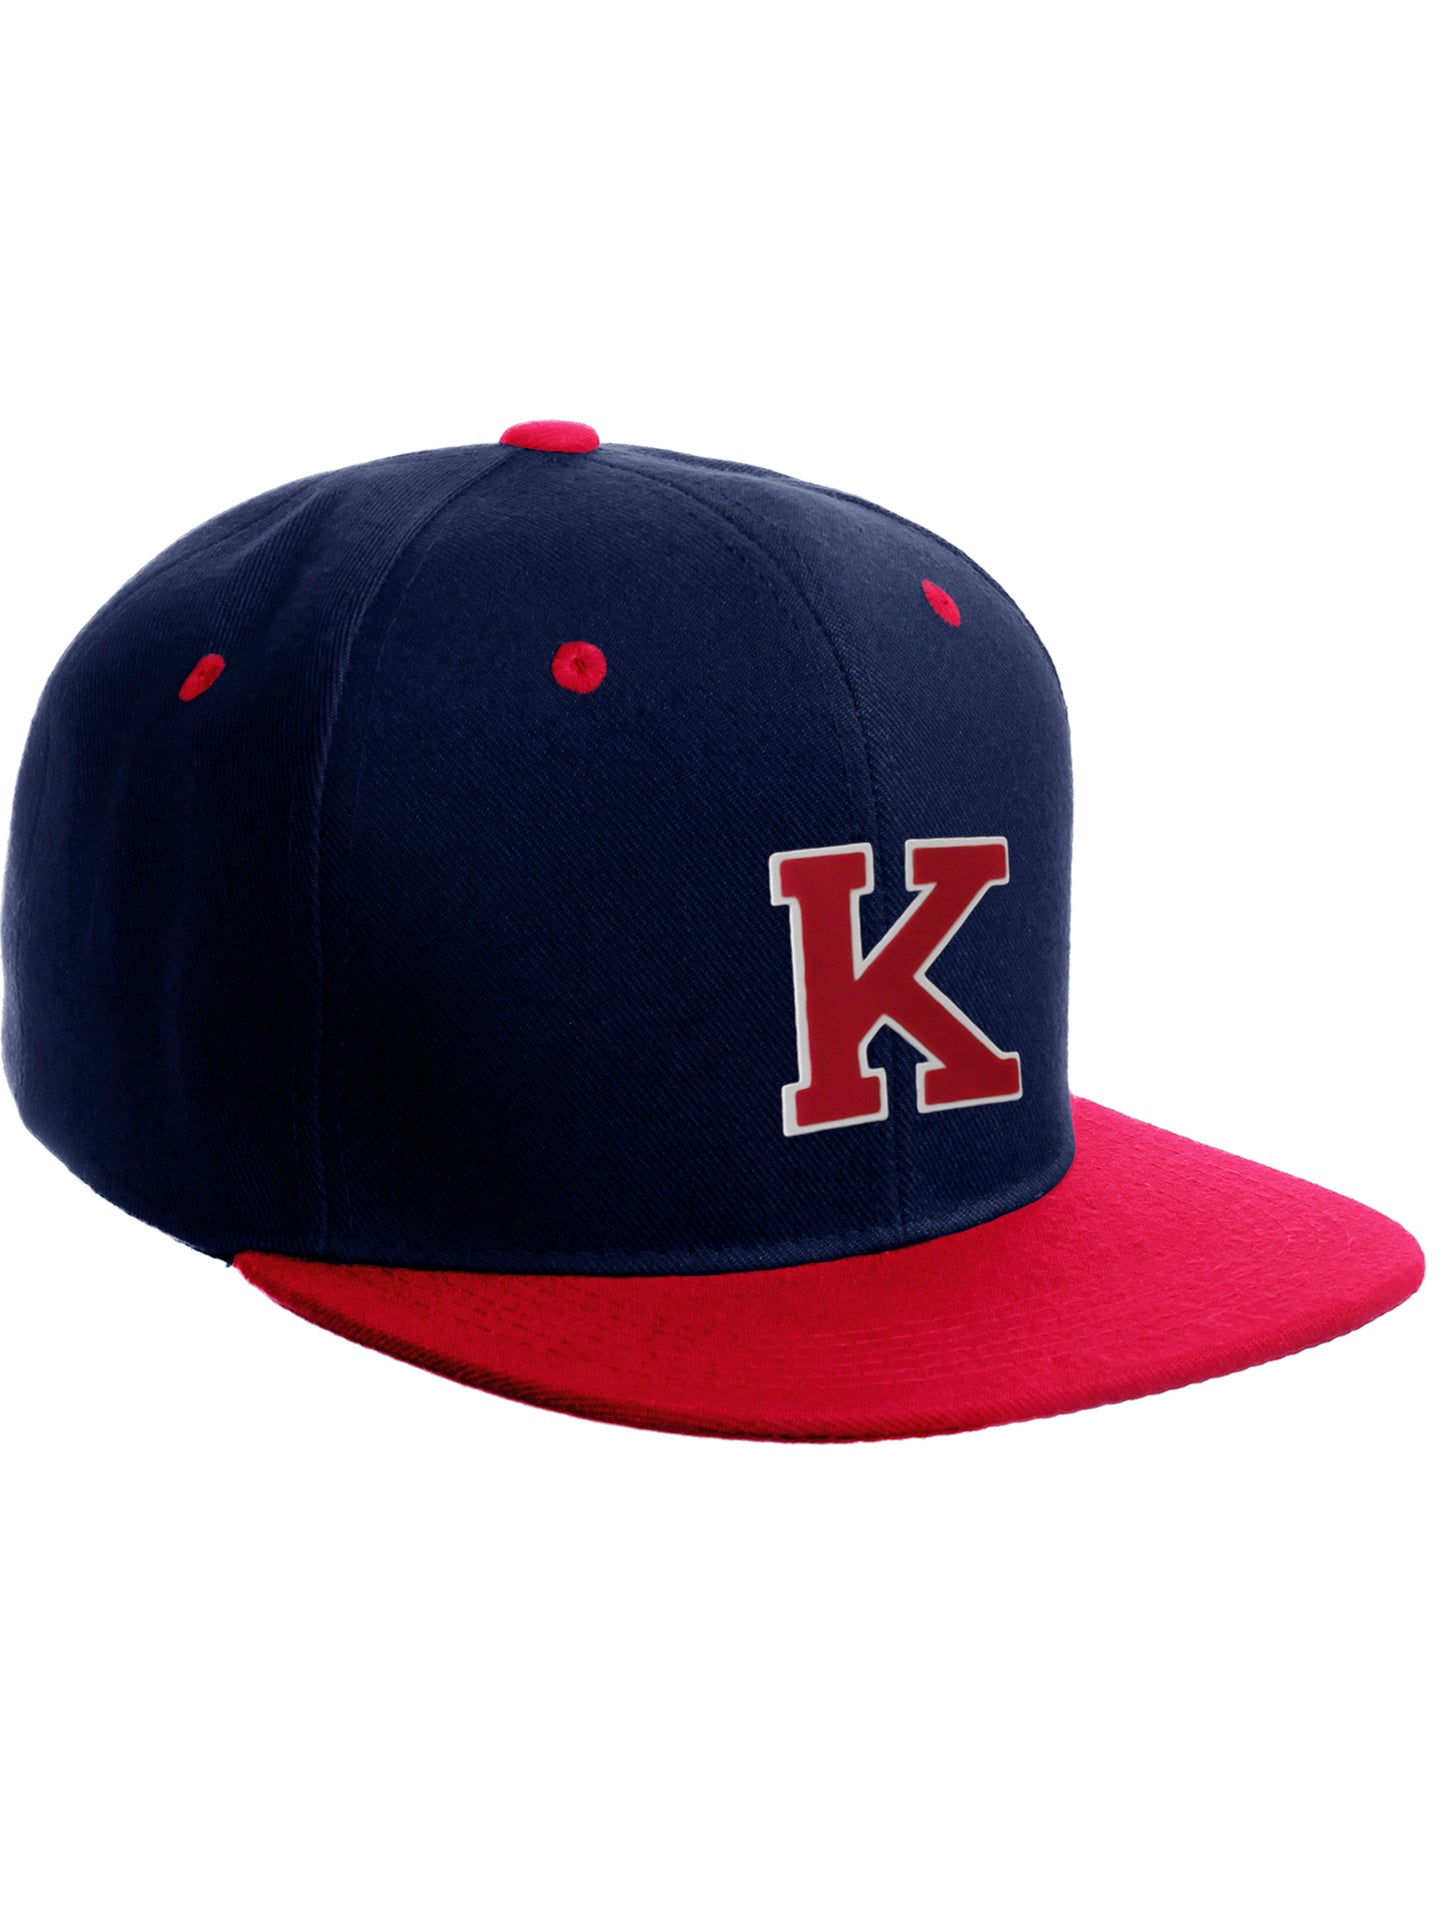 Classic Snapback Hat Custom A to Z Initial Letters, Navy Red Cap White Red